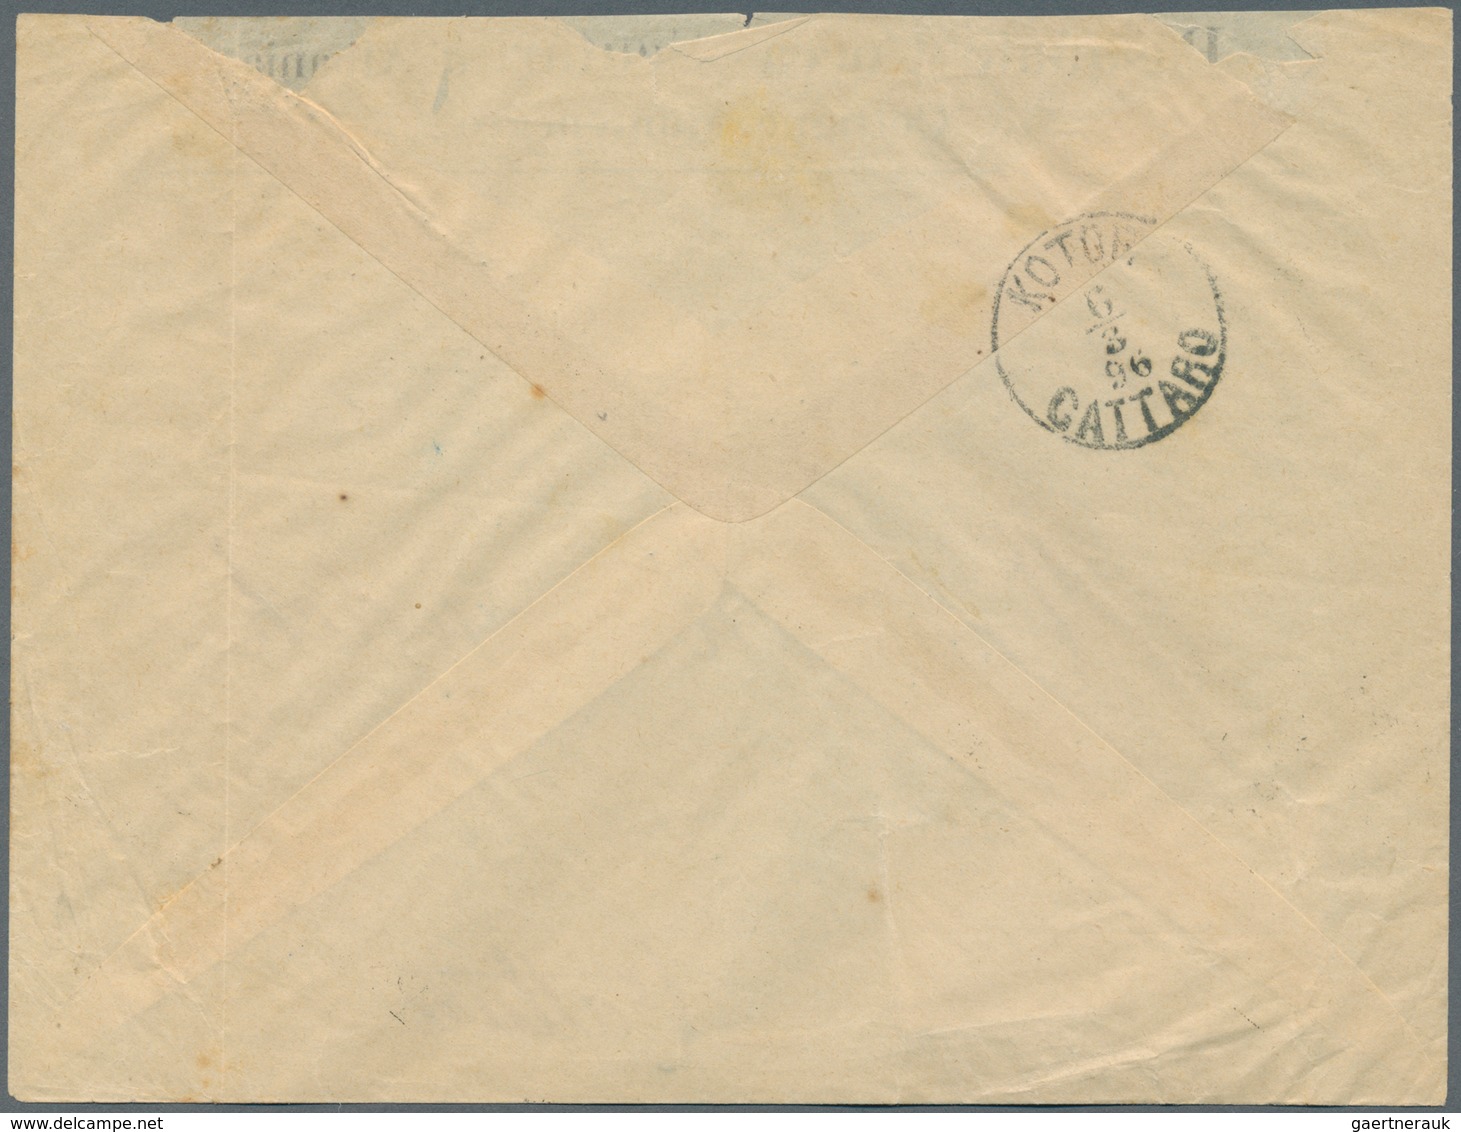 Montenegro: 1896, Commercial Envelope Franked With 2n, Narrow Margins And 3n, Wide Margins, Both Thi - Montenegro